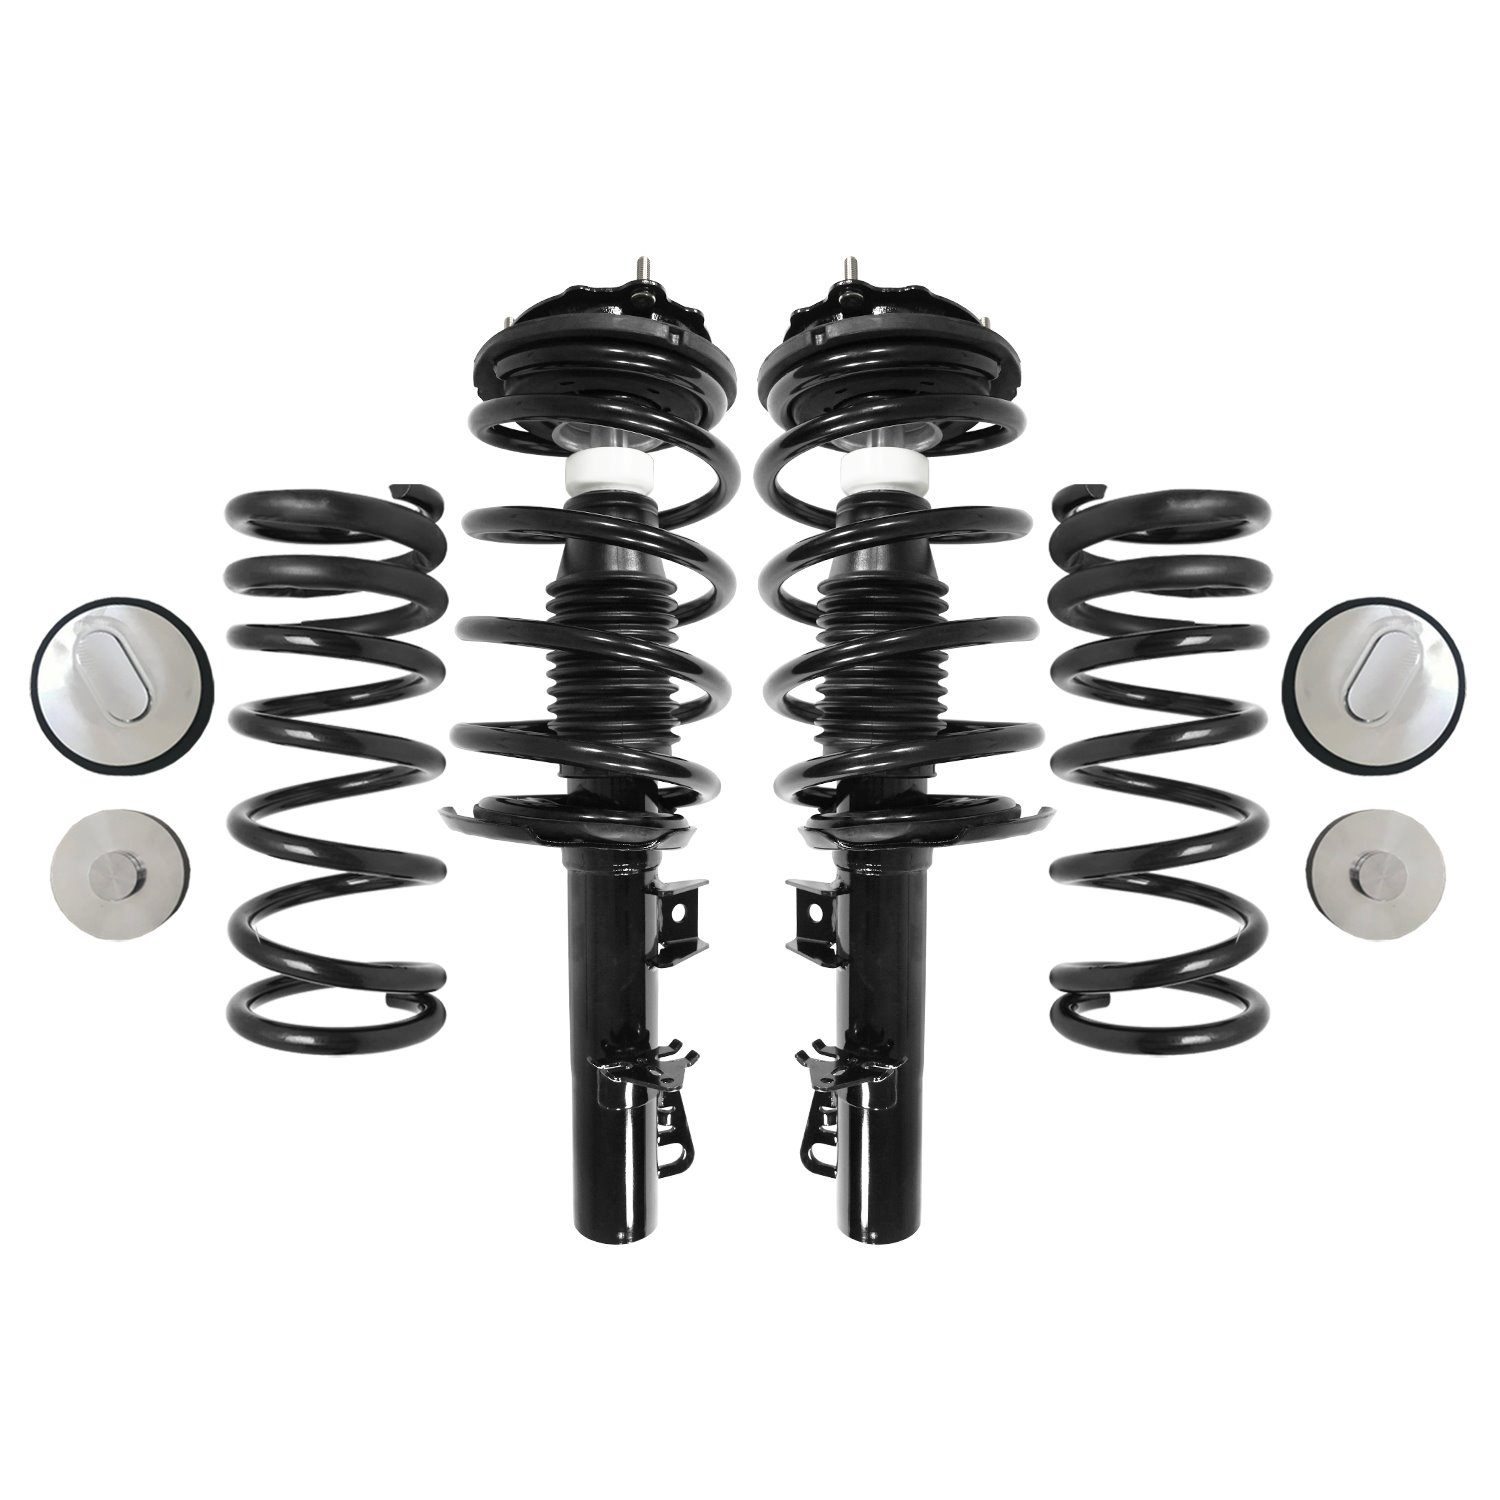 4-61690c-30-539000 Air Spring To Coil Spring Conversion Kit Fits Select Lincoln Continental